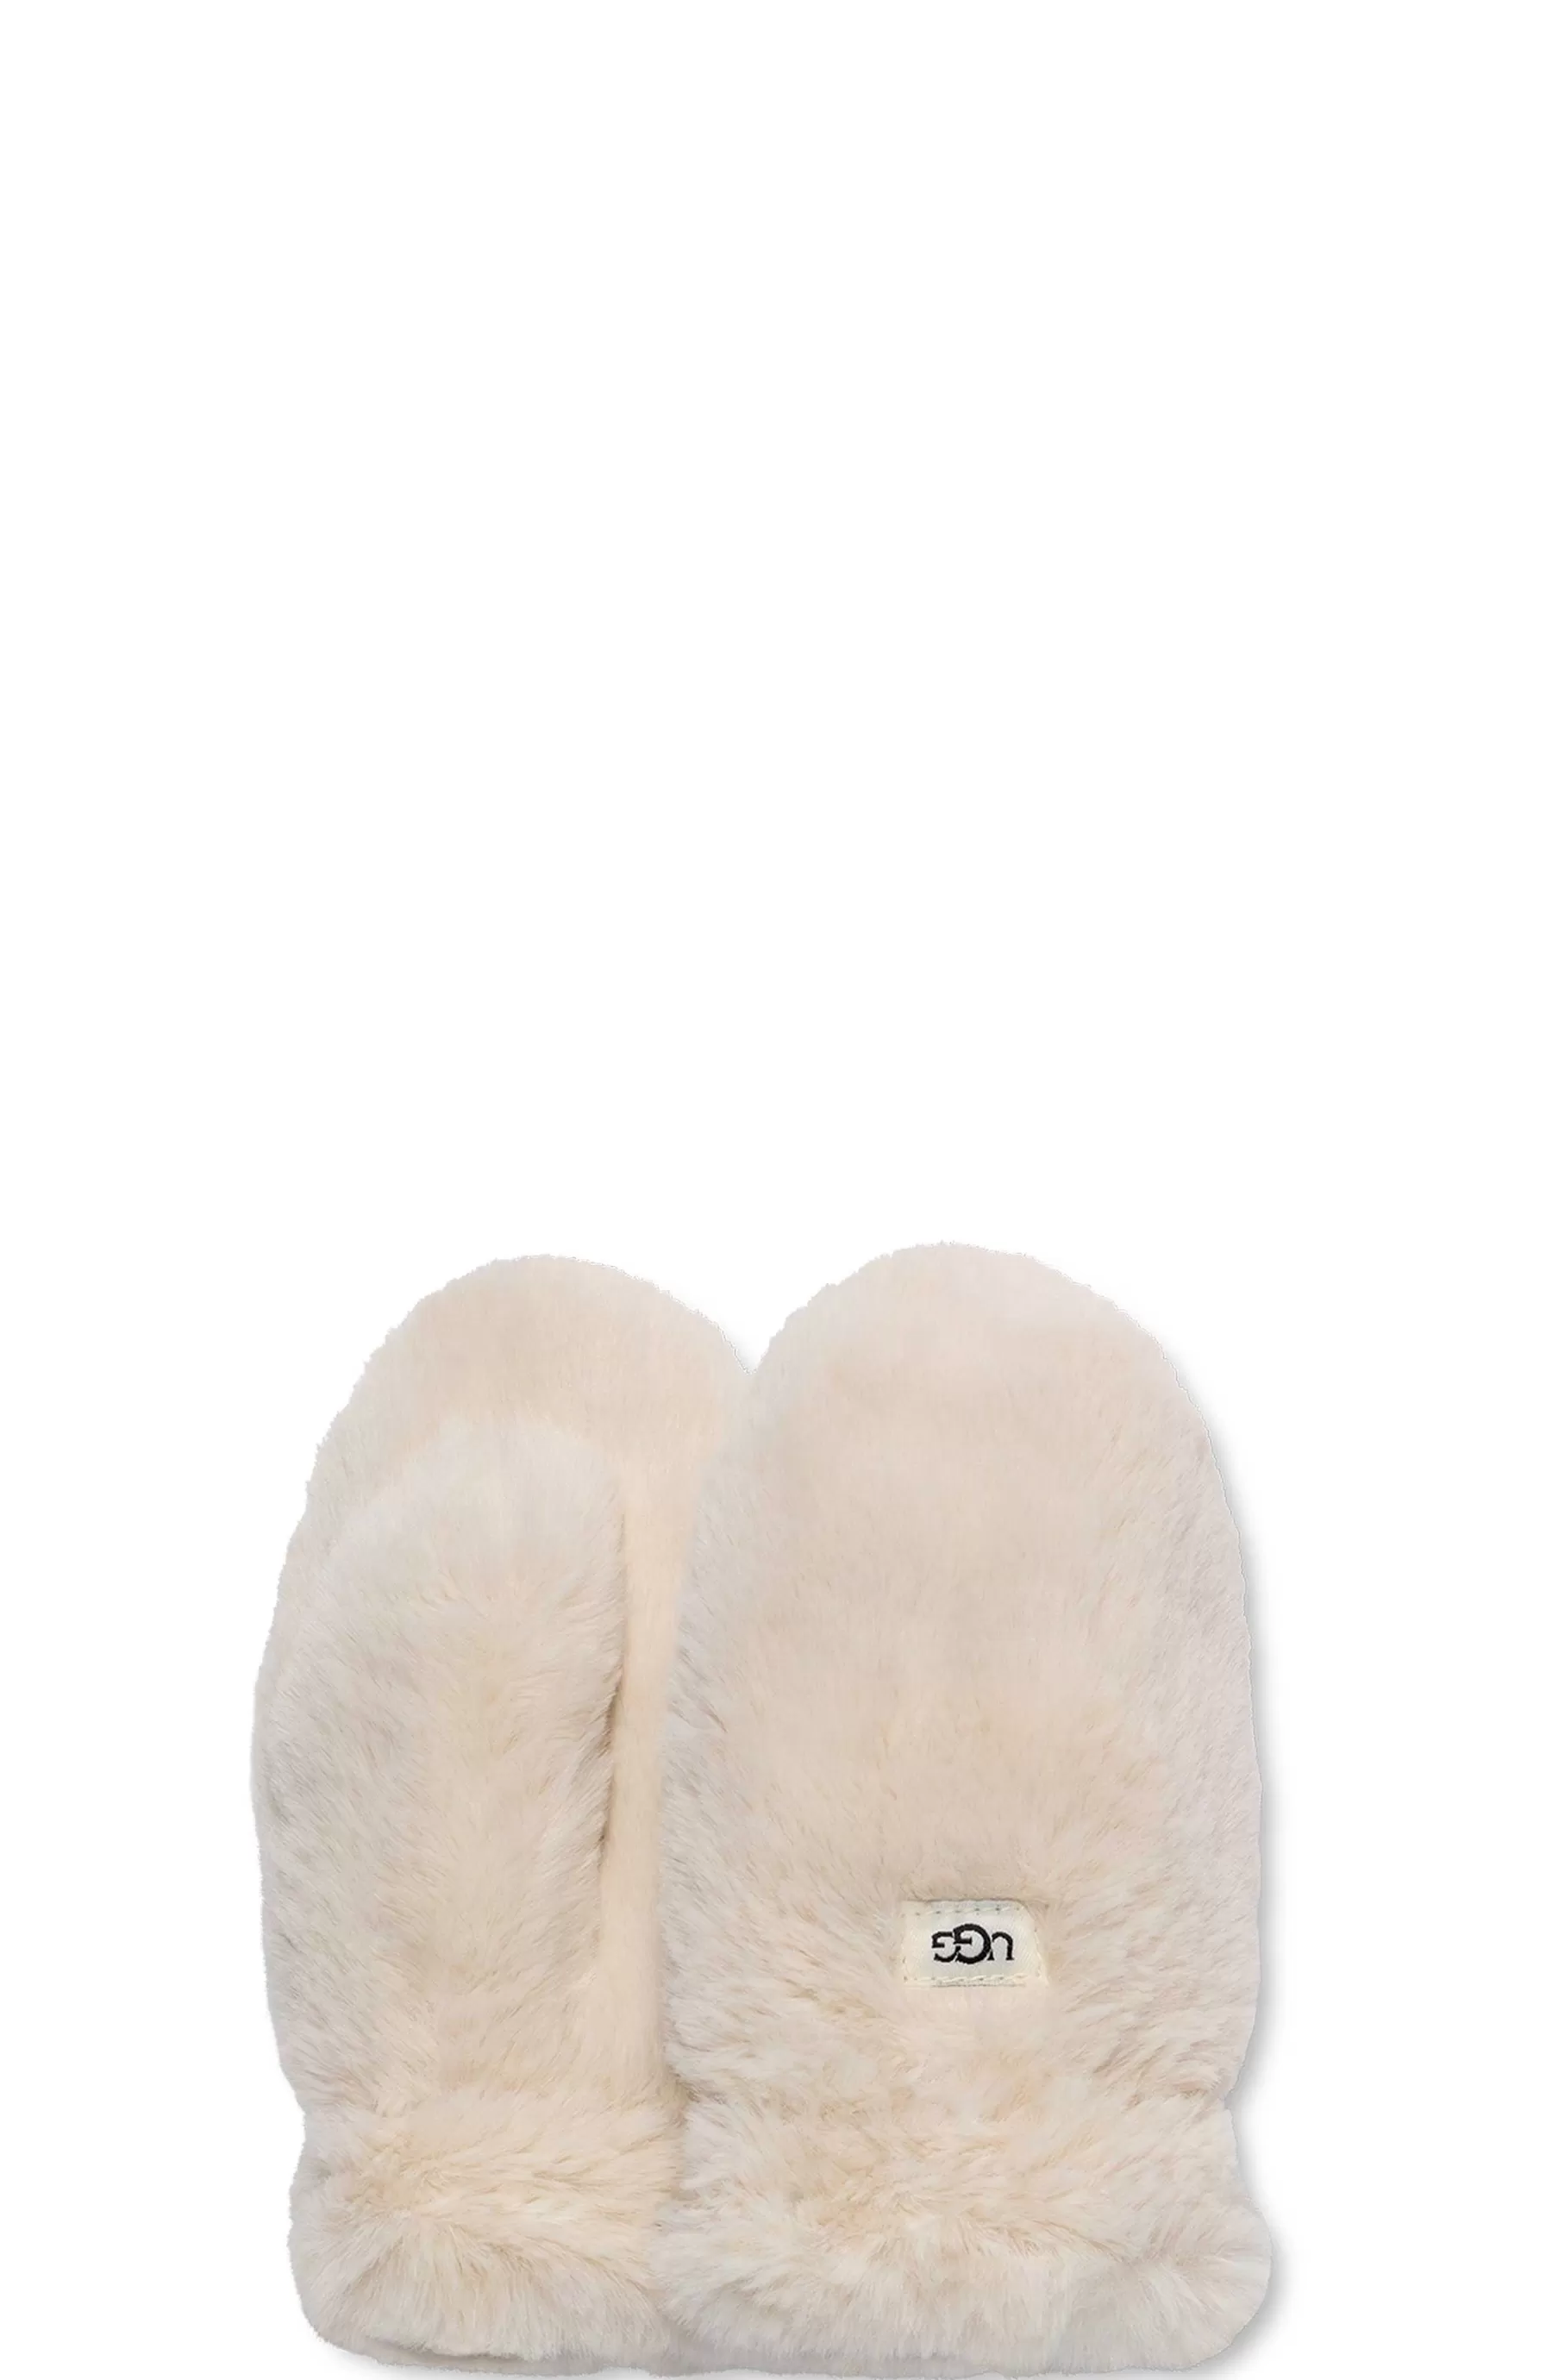 Mitaines en fausse fourrure, | UGG Store